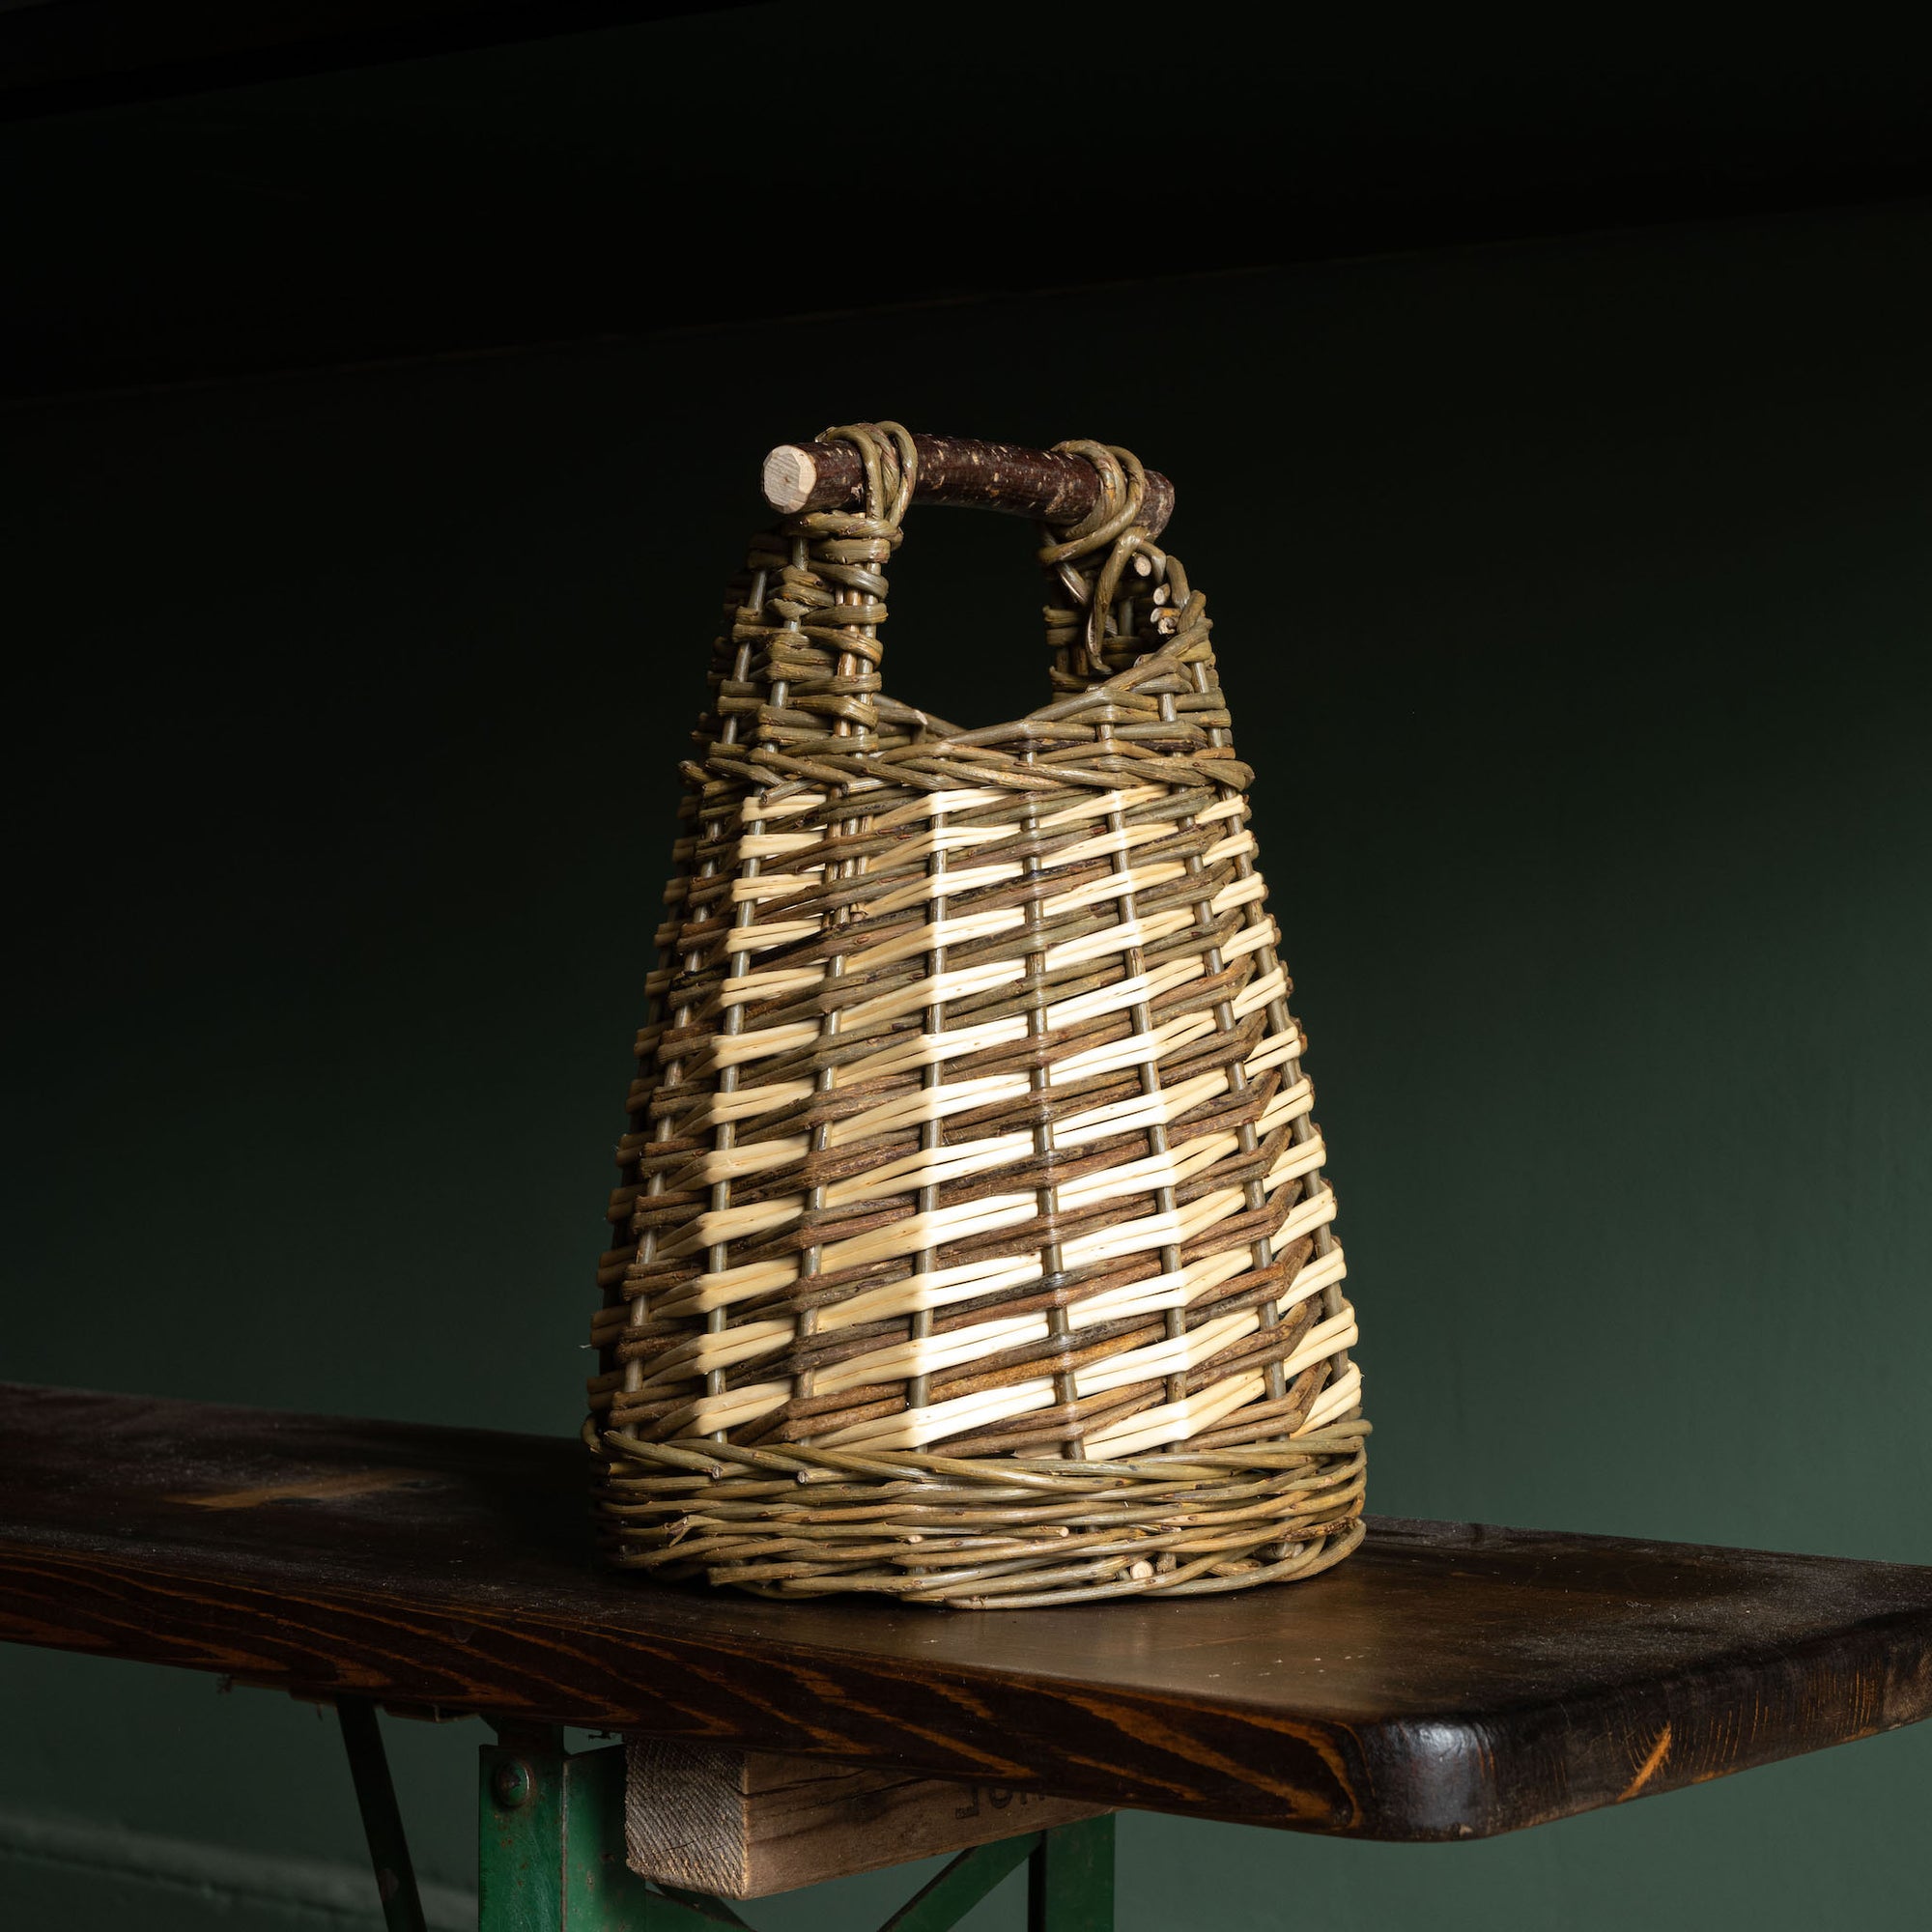 Rachel Bower small Asymetric Basket with stripped willow woven design detail